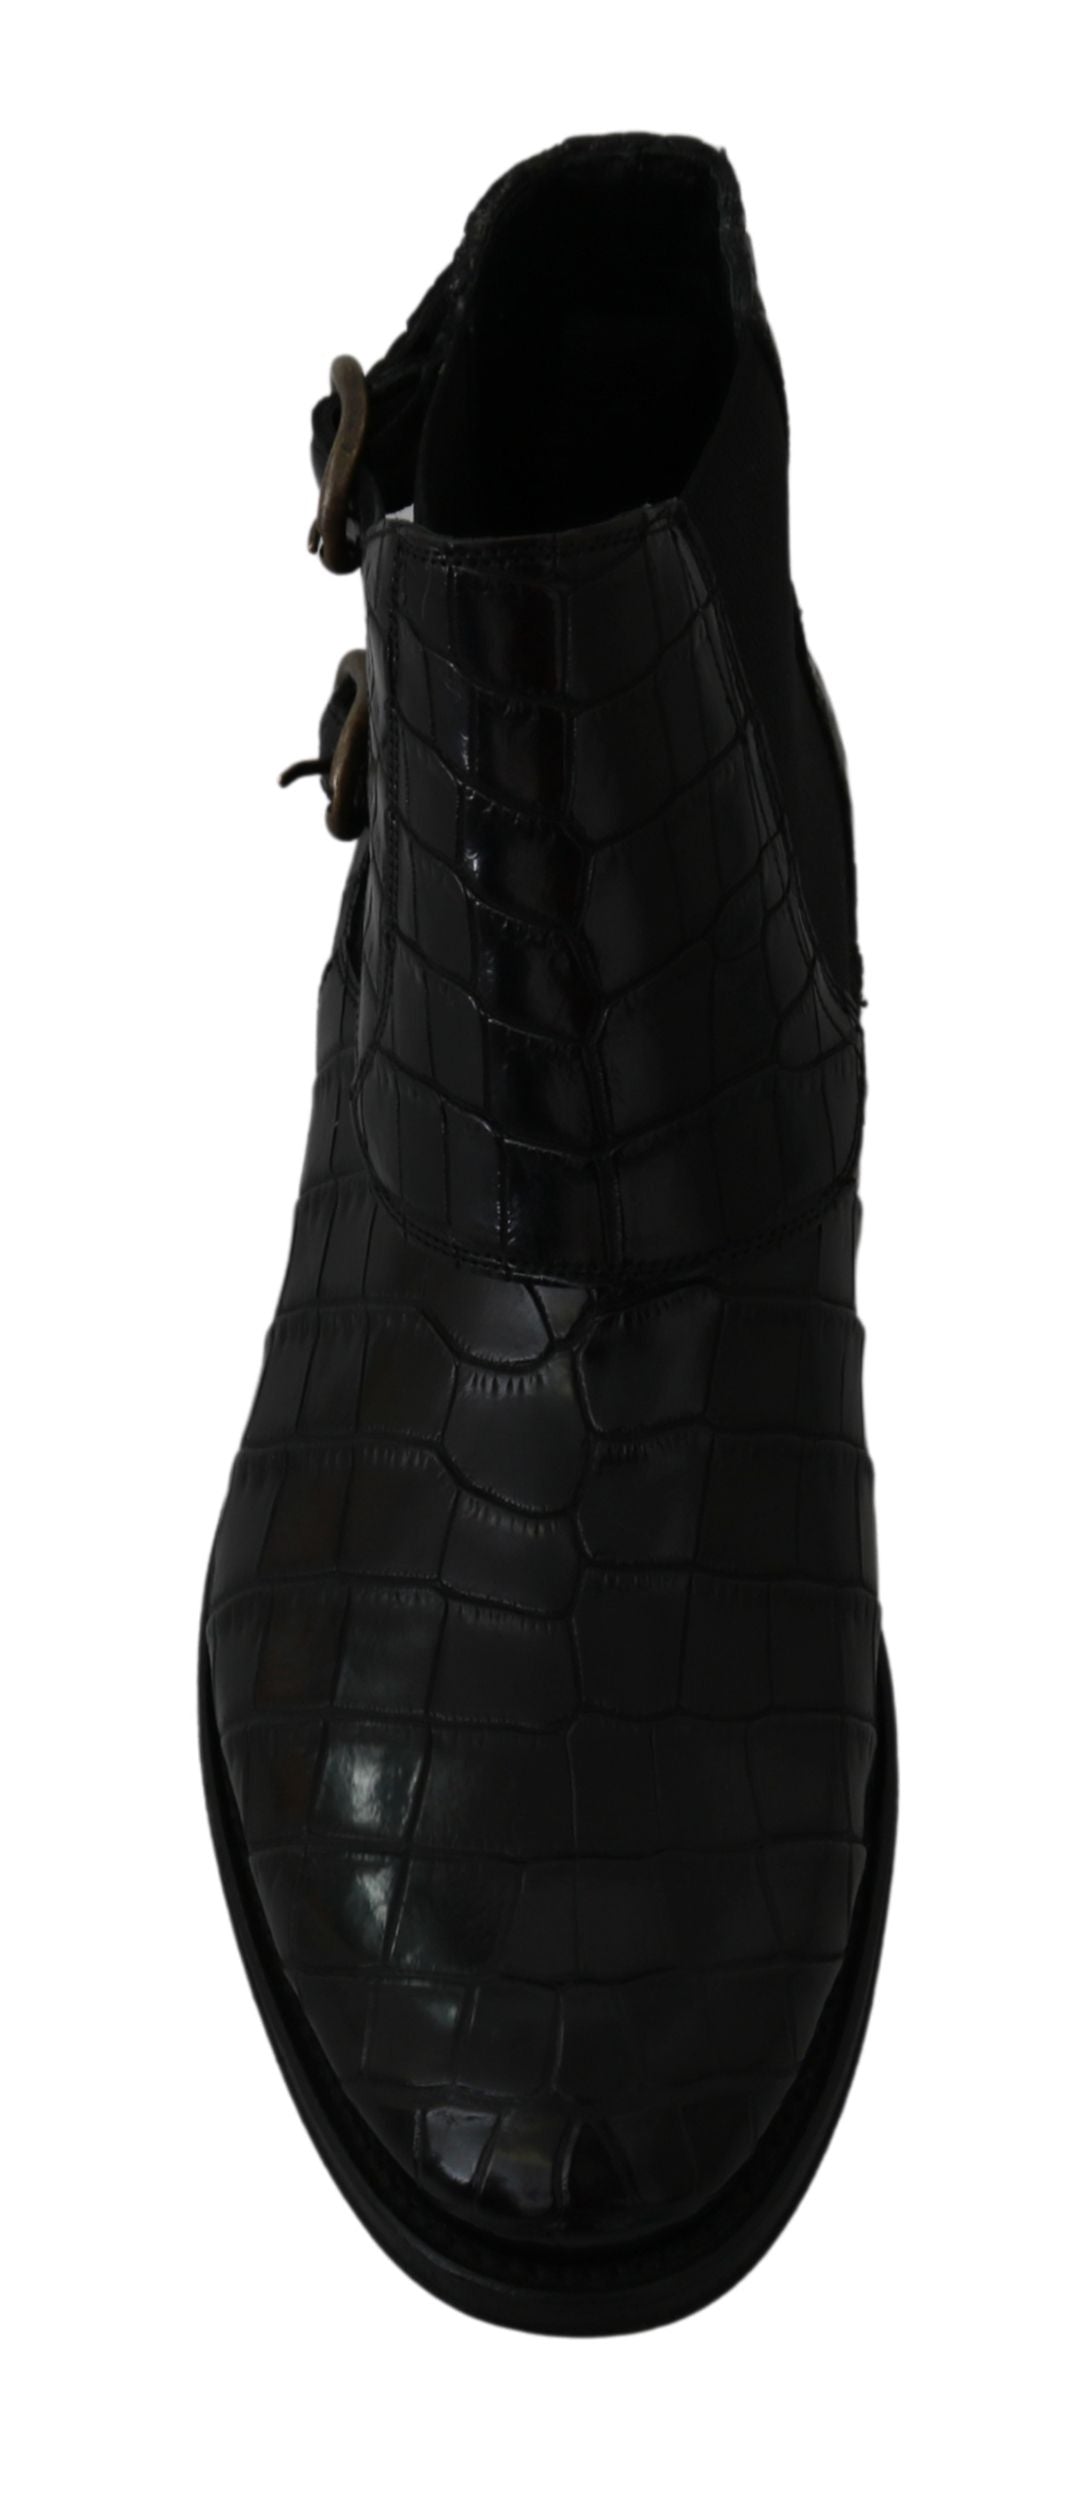 Dolce & Gabbana Elegant Derby Brogue Boots in Exotic Leather